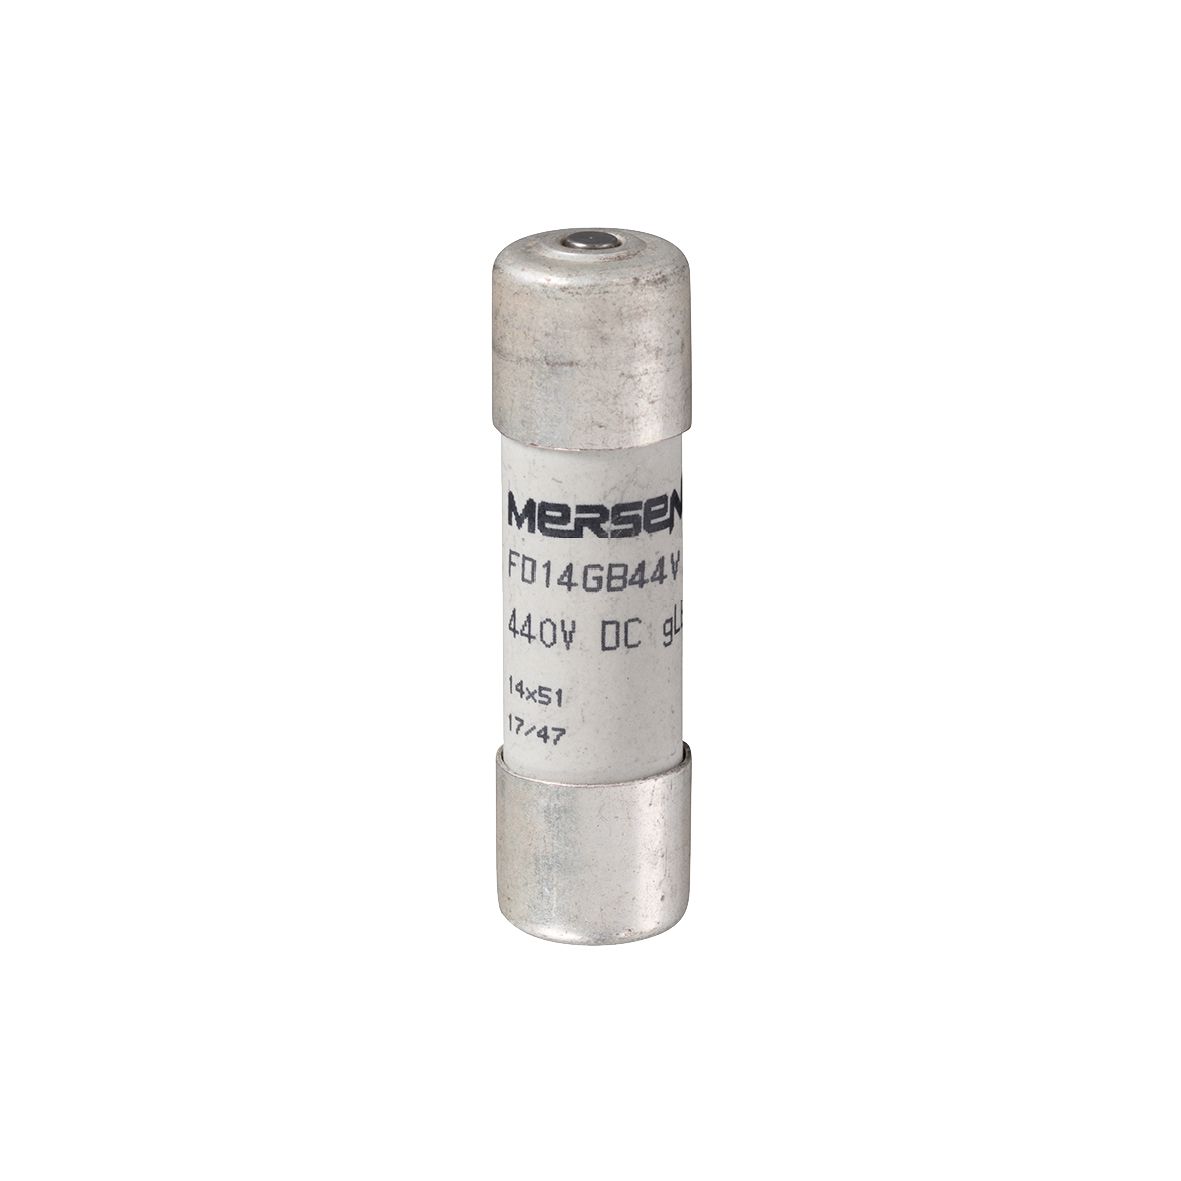 J075724 - Cylindrical fuse-link GRB 440VDC 14x51, 25A with striker